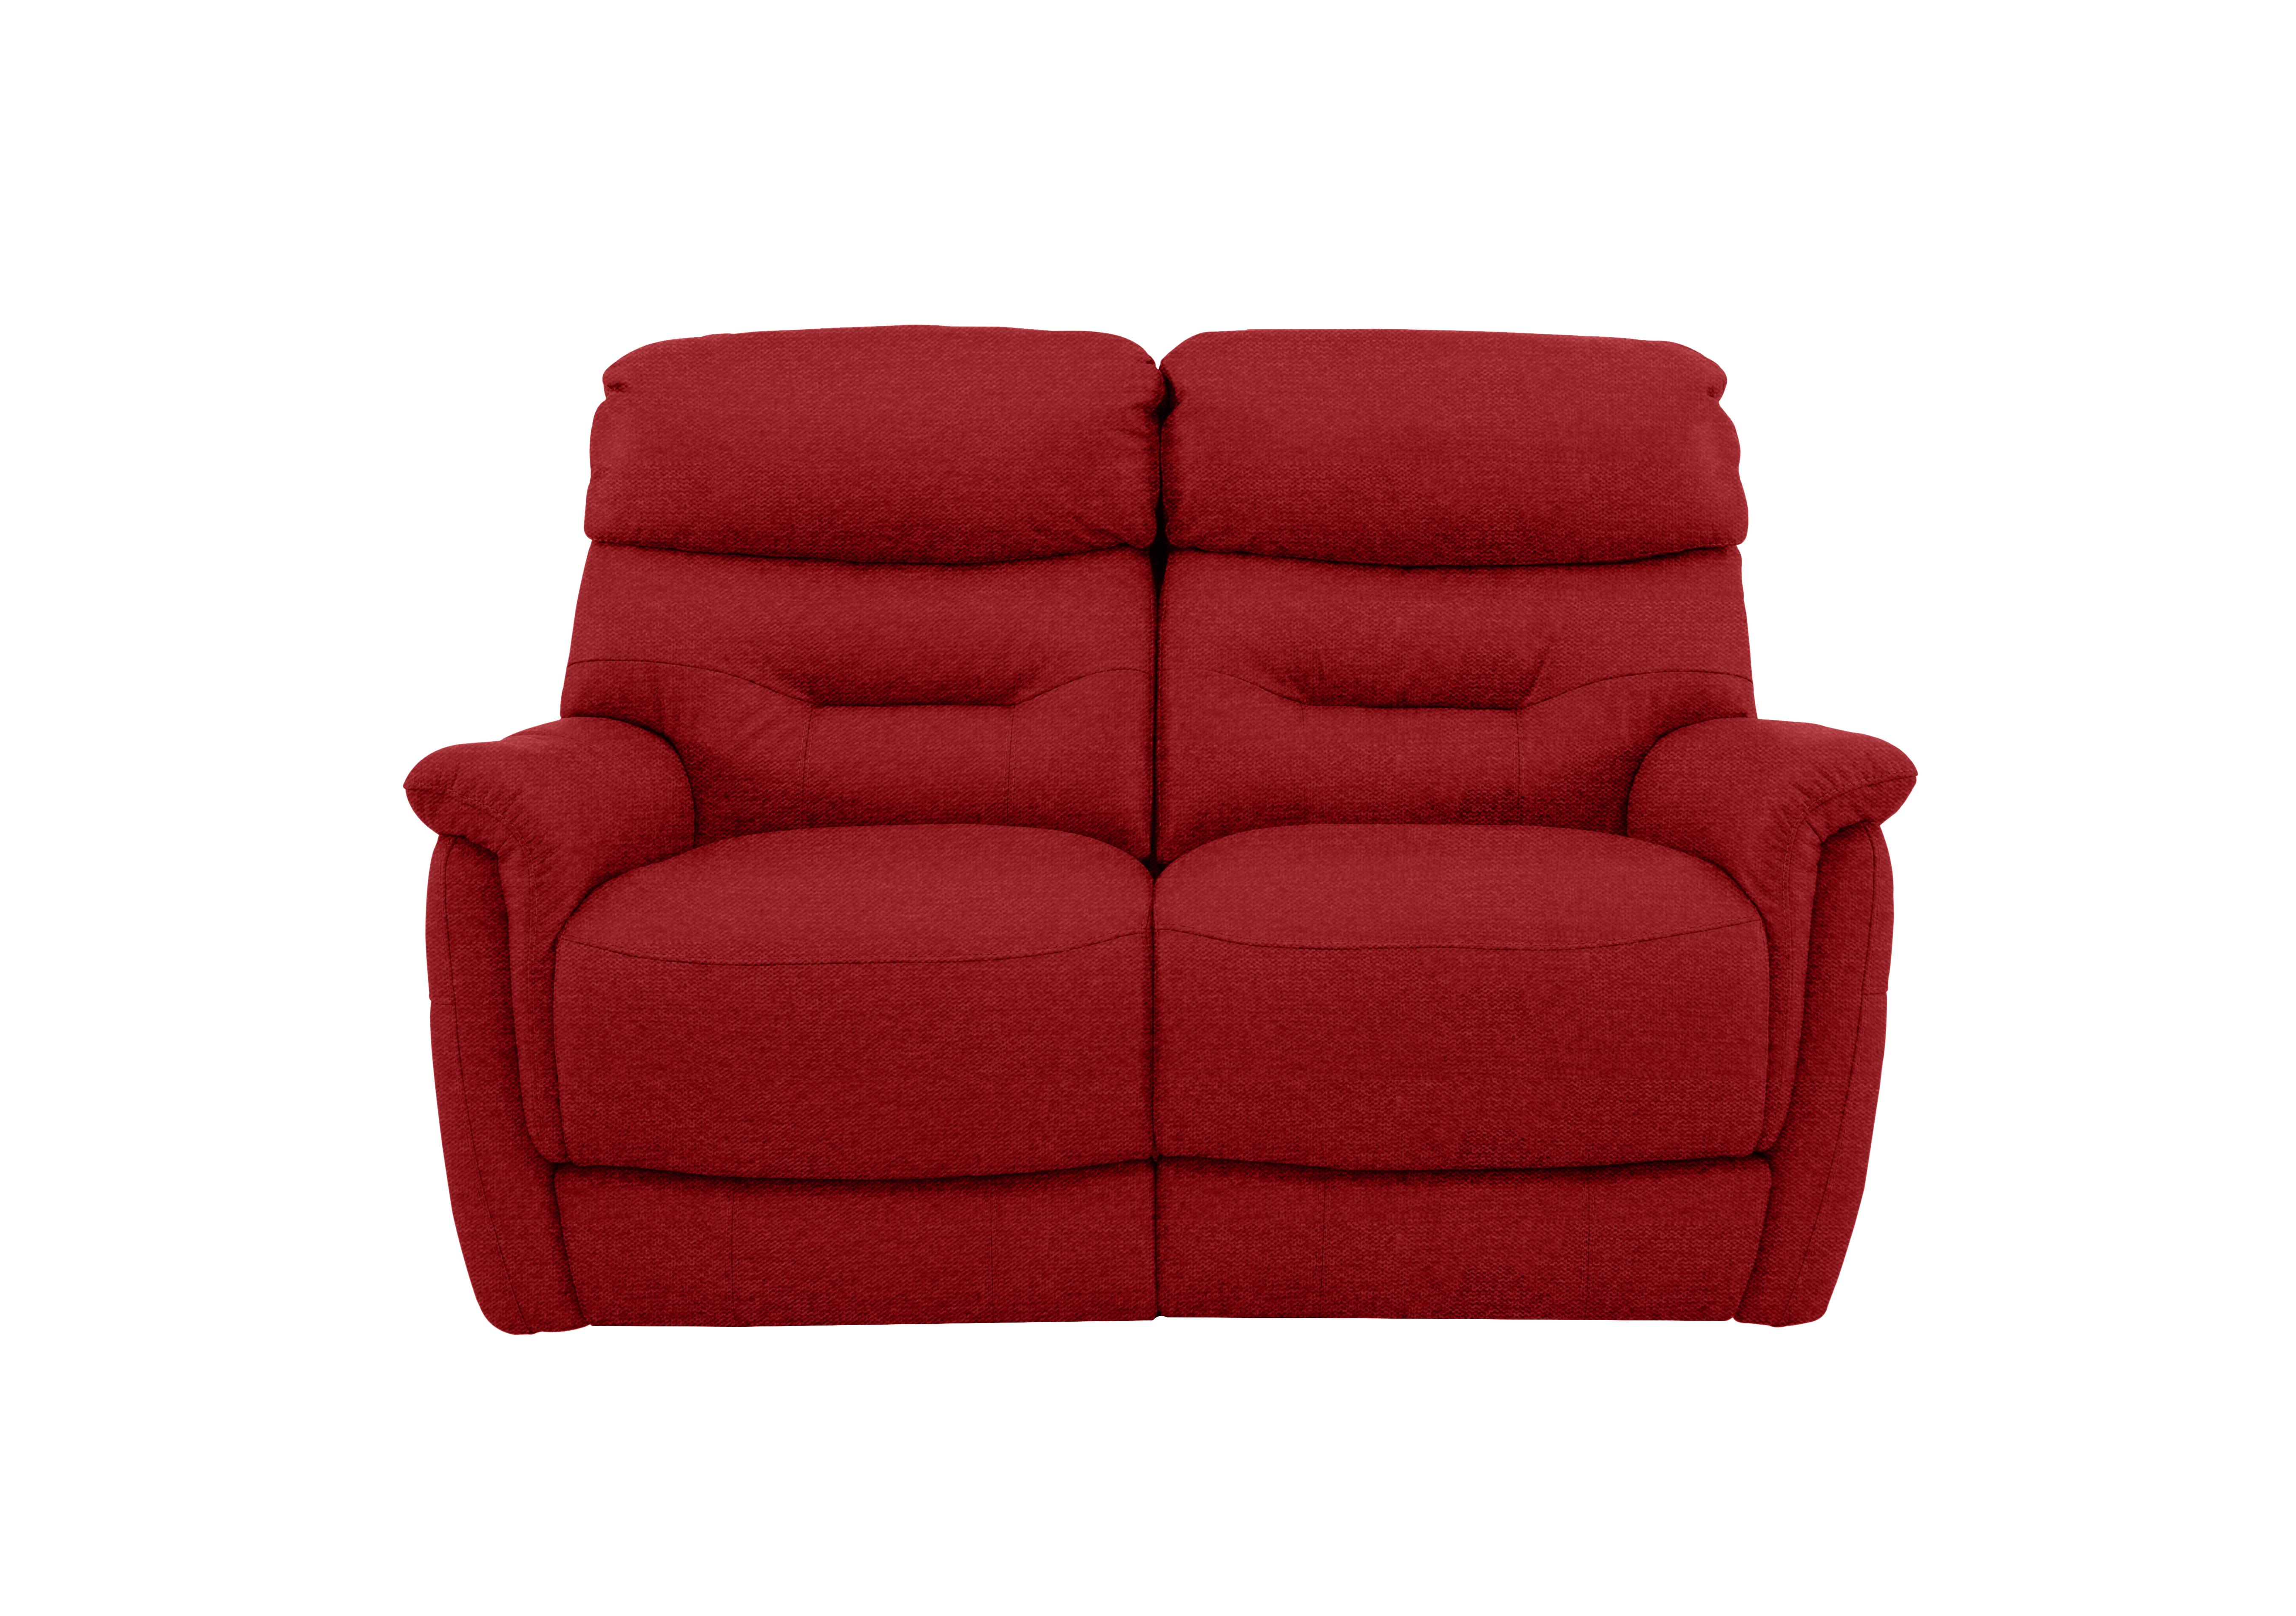 Chicago 2 Seater Fabric Sofa in Fab-Blt-R29 Red on Furniture Village